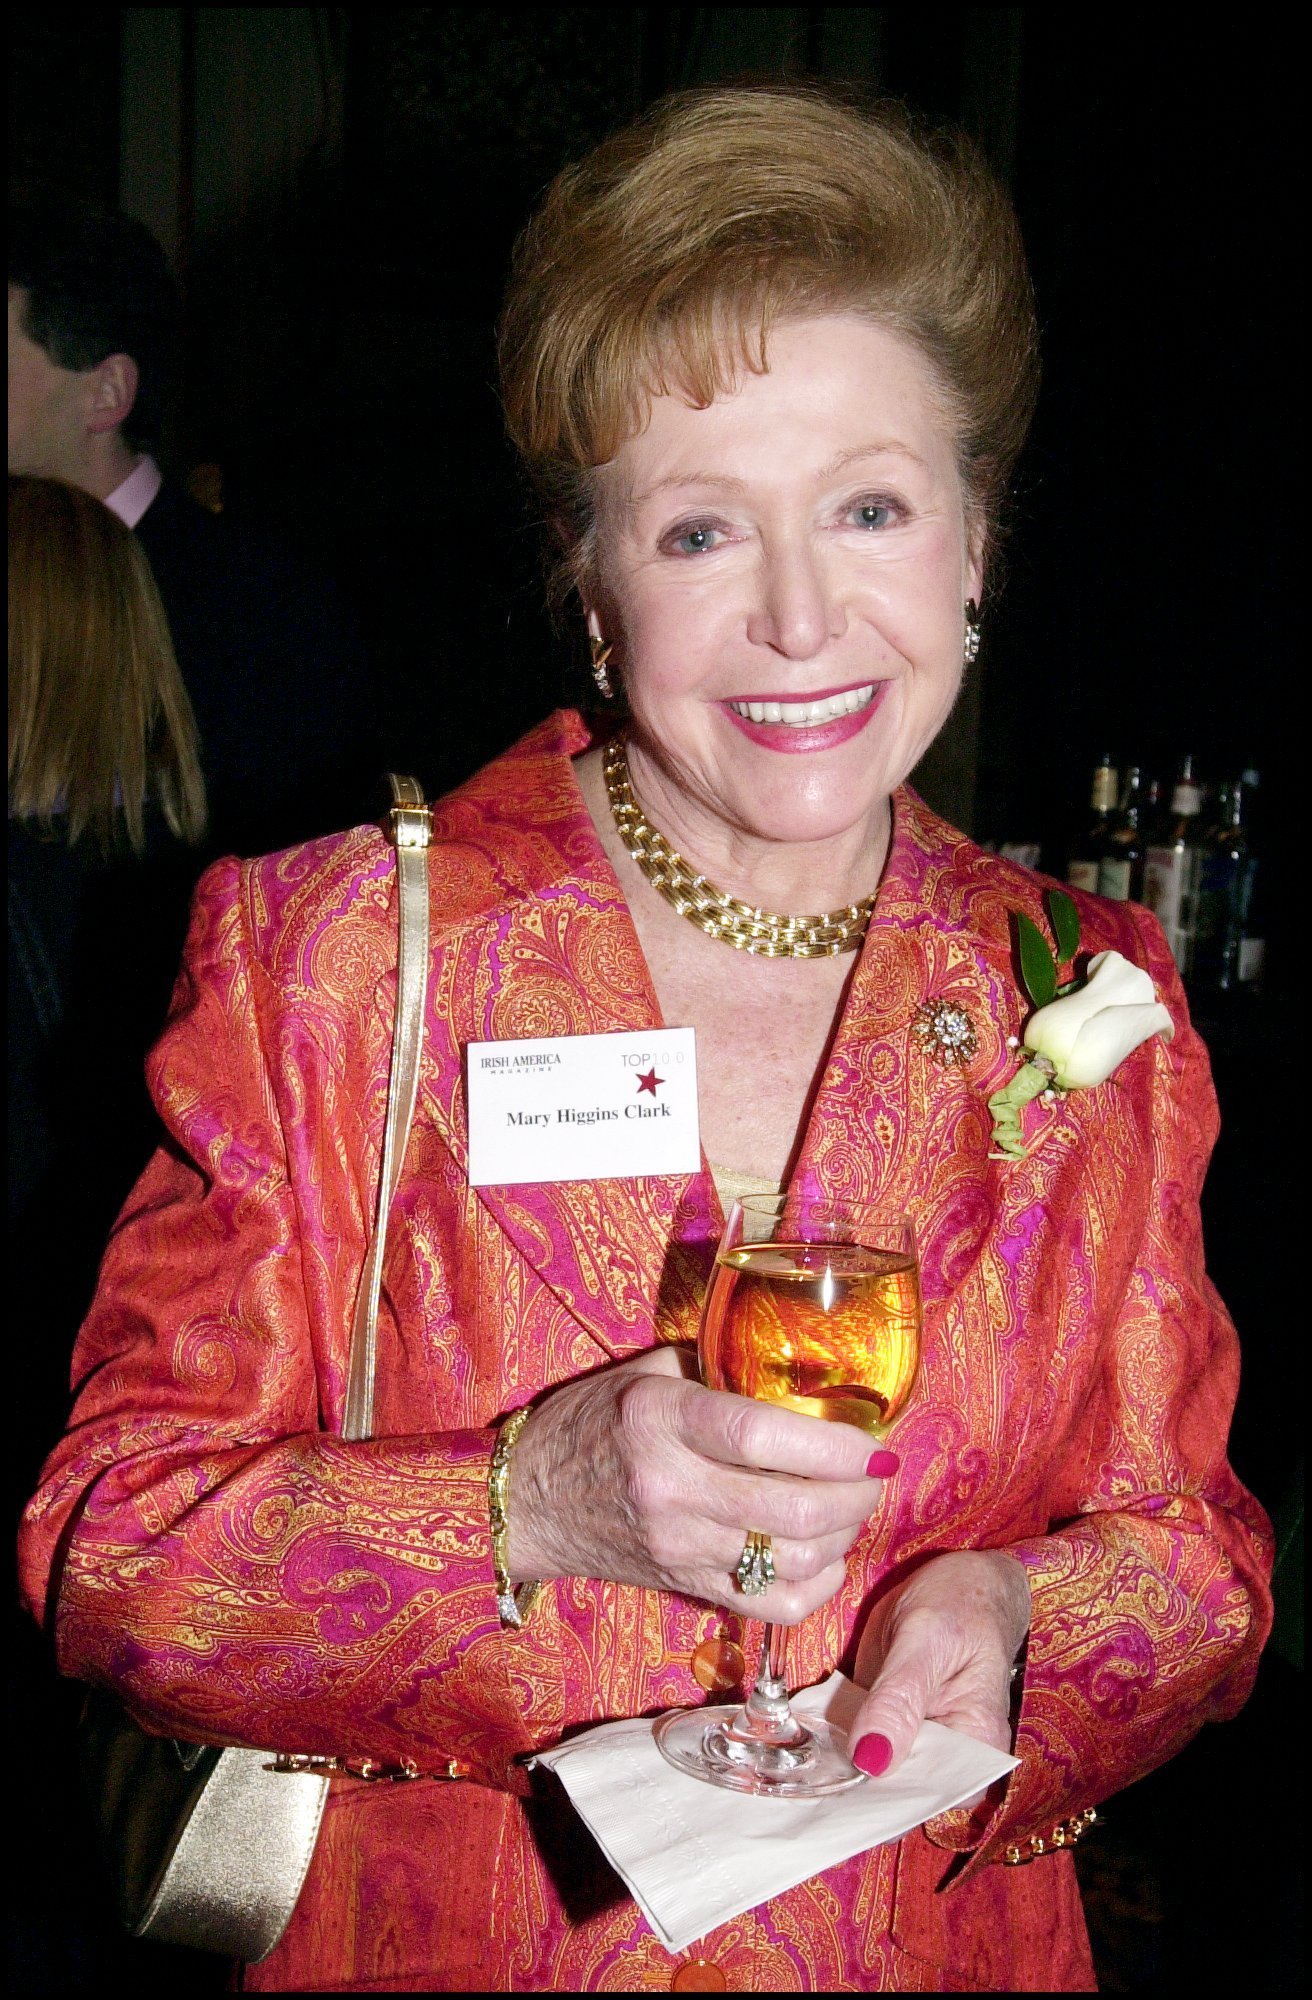 Mary Higgins Clark at  the16th annual Irish America top 100 gala at the Plaza Hotel in New York City | Photo: David LEFRANC/Gamma-Rapho via Getty Images